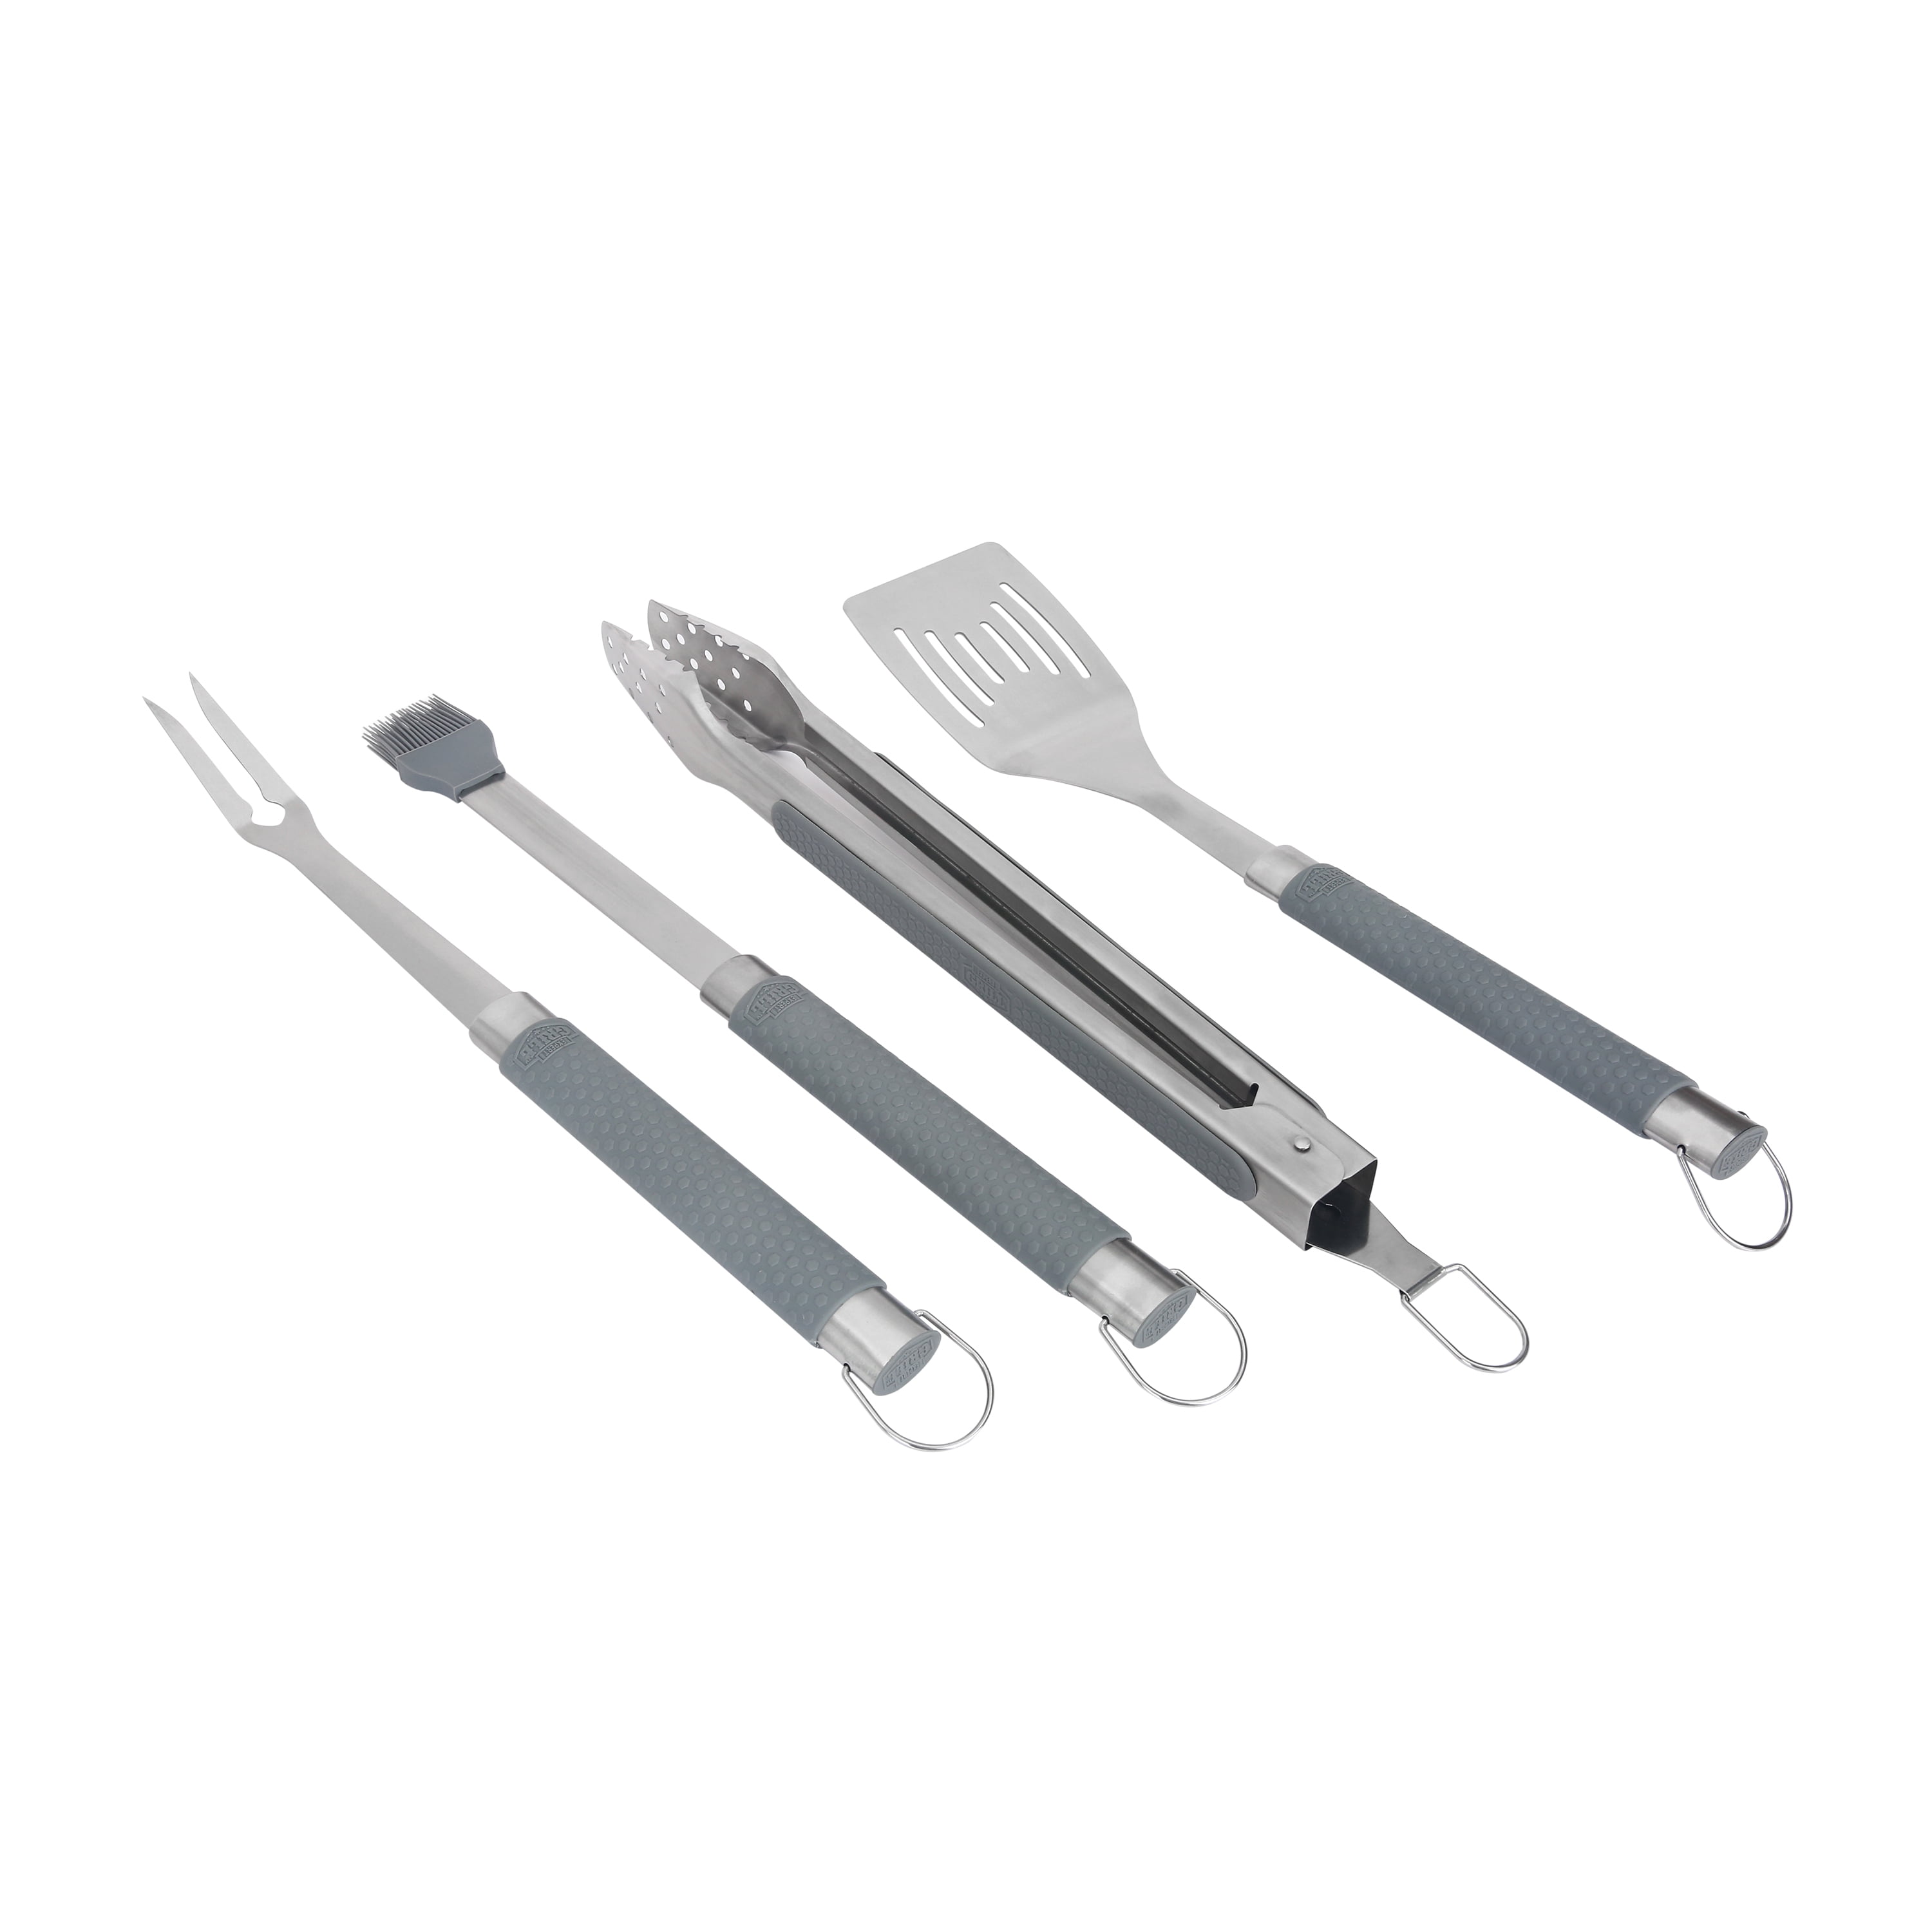 Expert Grill Stainless Steel 4-piece BBQ Tool Set with Soft Grip Handles